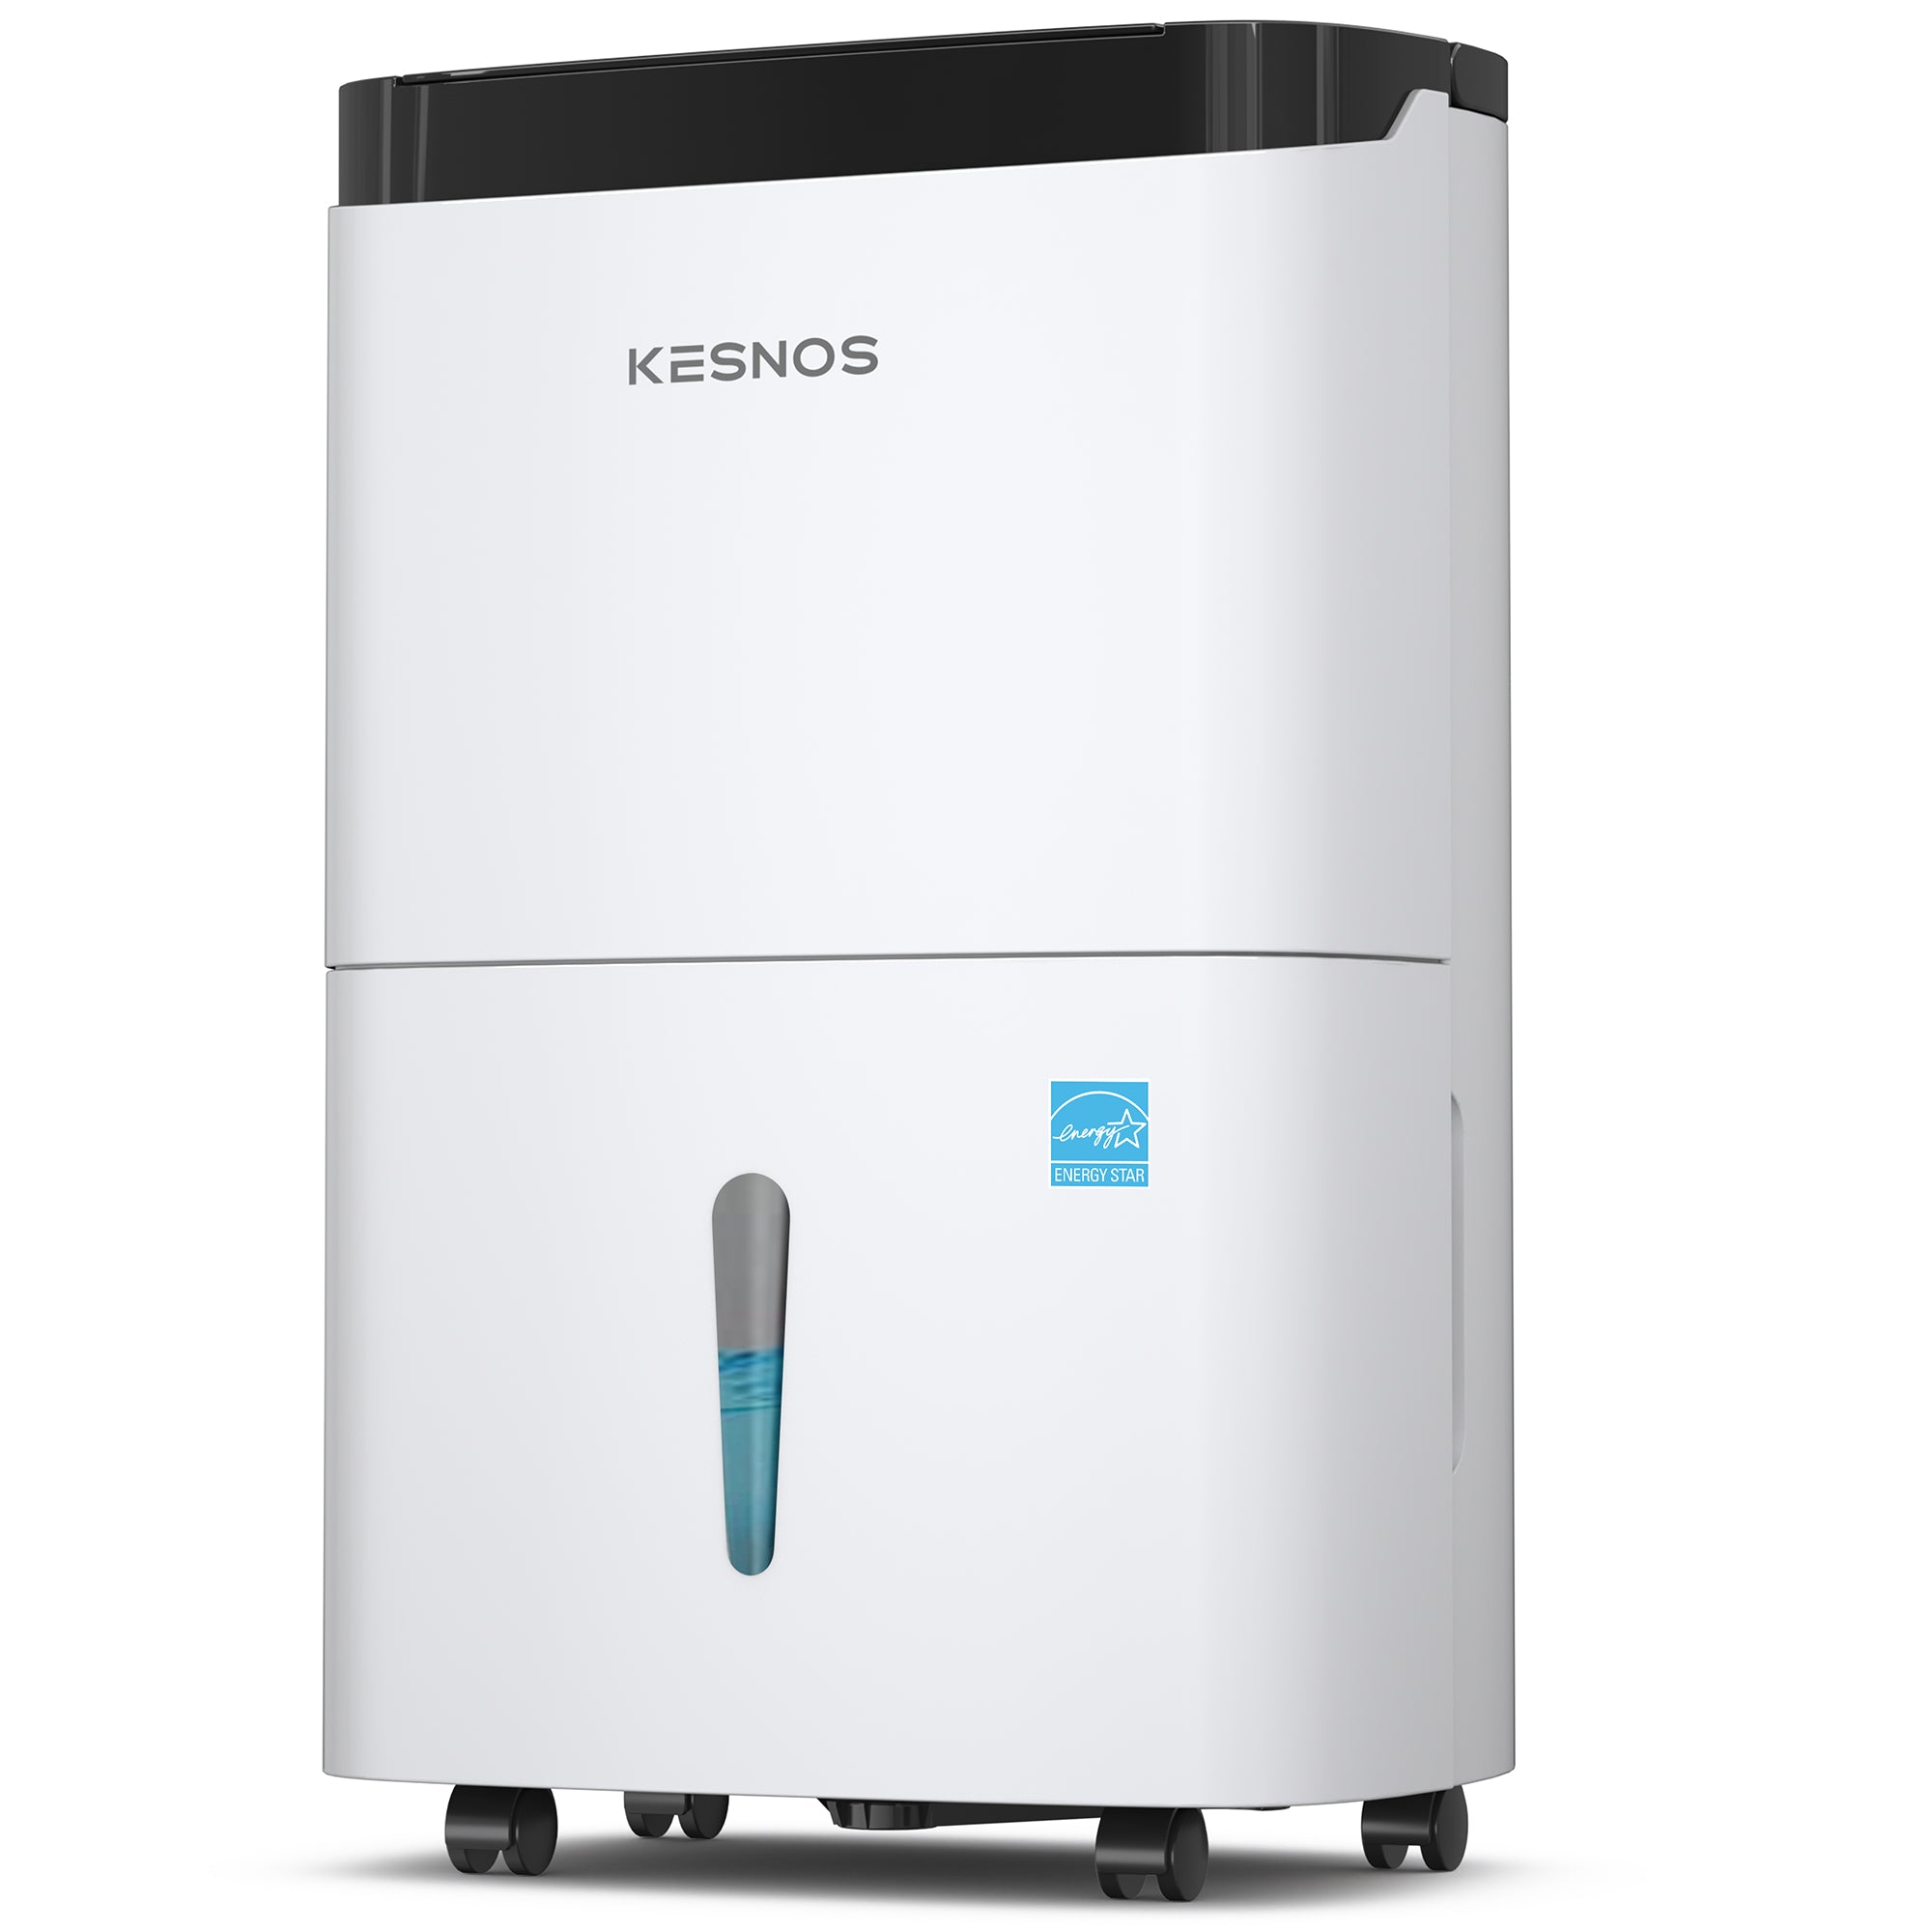 Kesnos 80 Pints Energy Star Home Dehumidifier for Space Up to 5000 Sq. Ft - Dehumidifier for Basement with Drain Hose, 0.92 Gal Water Tank, Handles, Self-Drying, Ideal for Home, Large Room(Model: YDA-80)